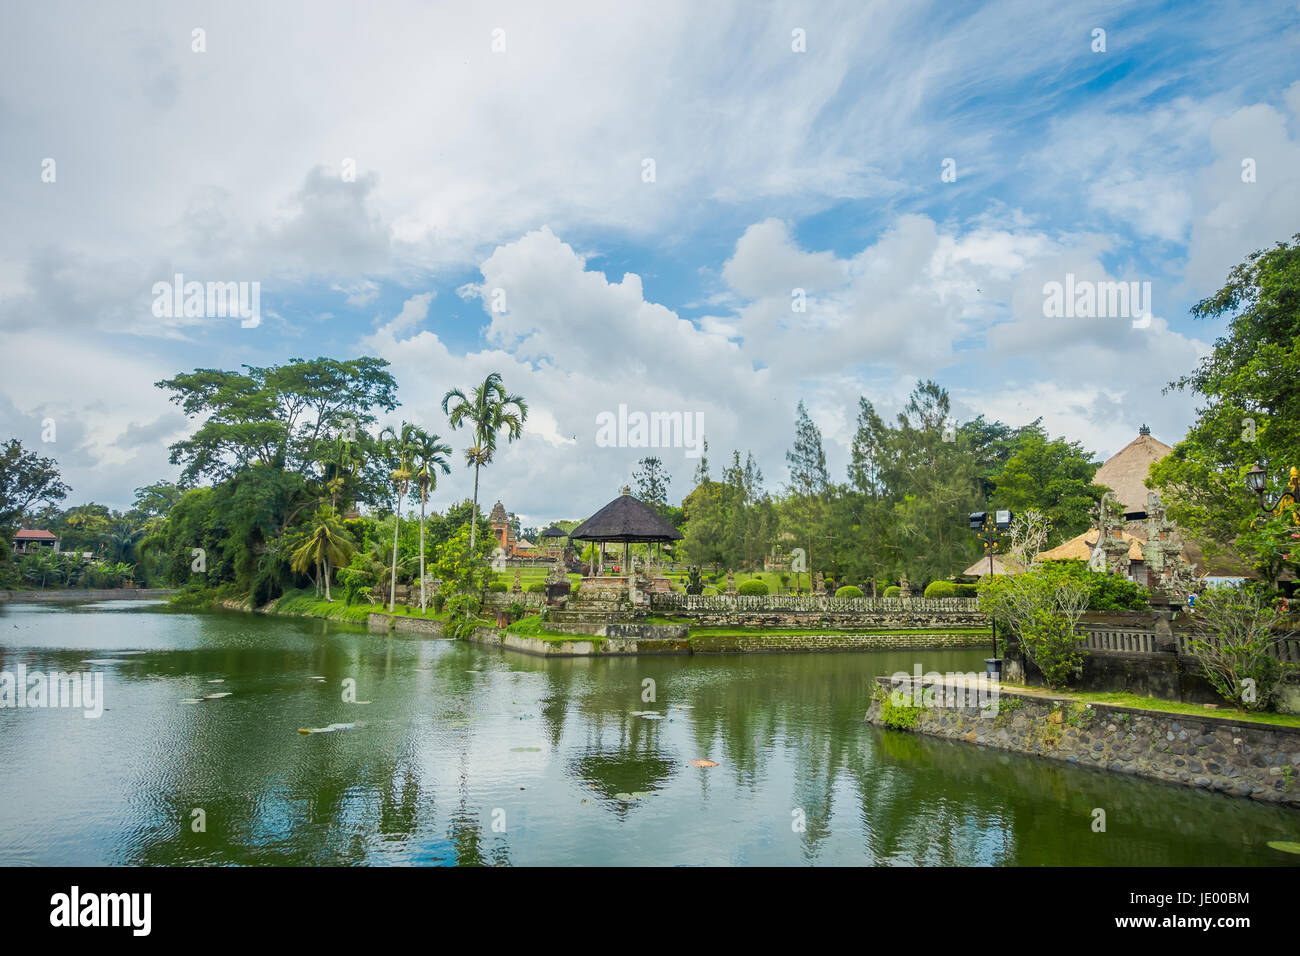 Taman Ayun Temple is a royal temple of Mengwi Empire located in Mengwi, Badung regency that is famous places of interest in Bali, Indonesia. Stock Photo